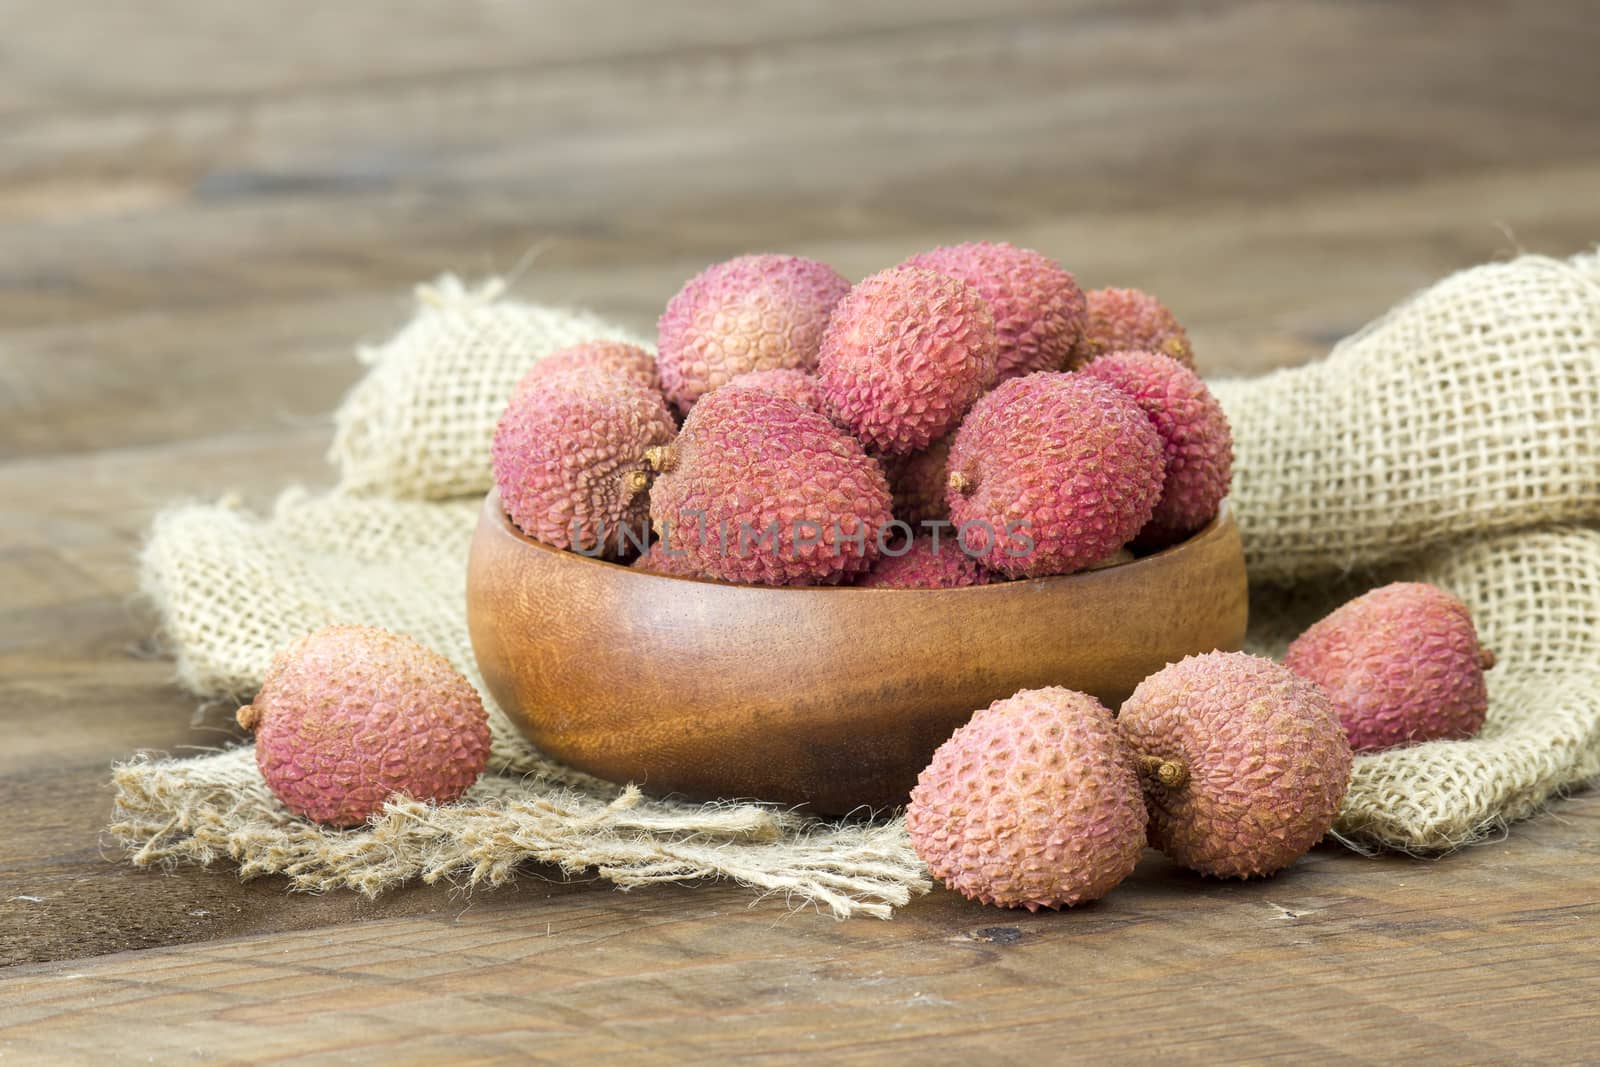 fresh lychees in a bowl  on wooden background by miradrozdowski